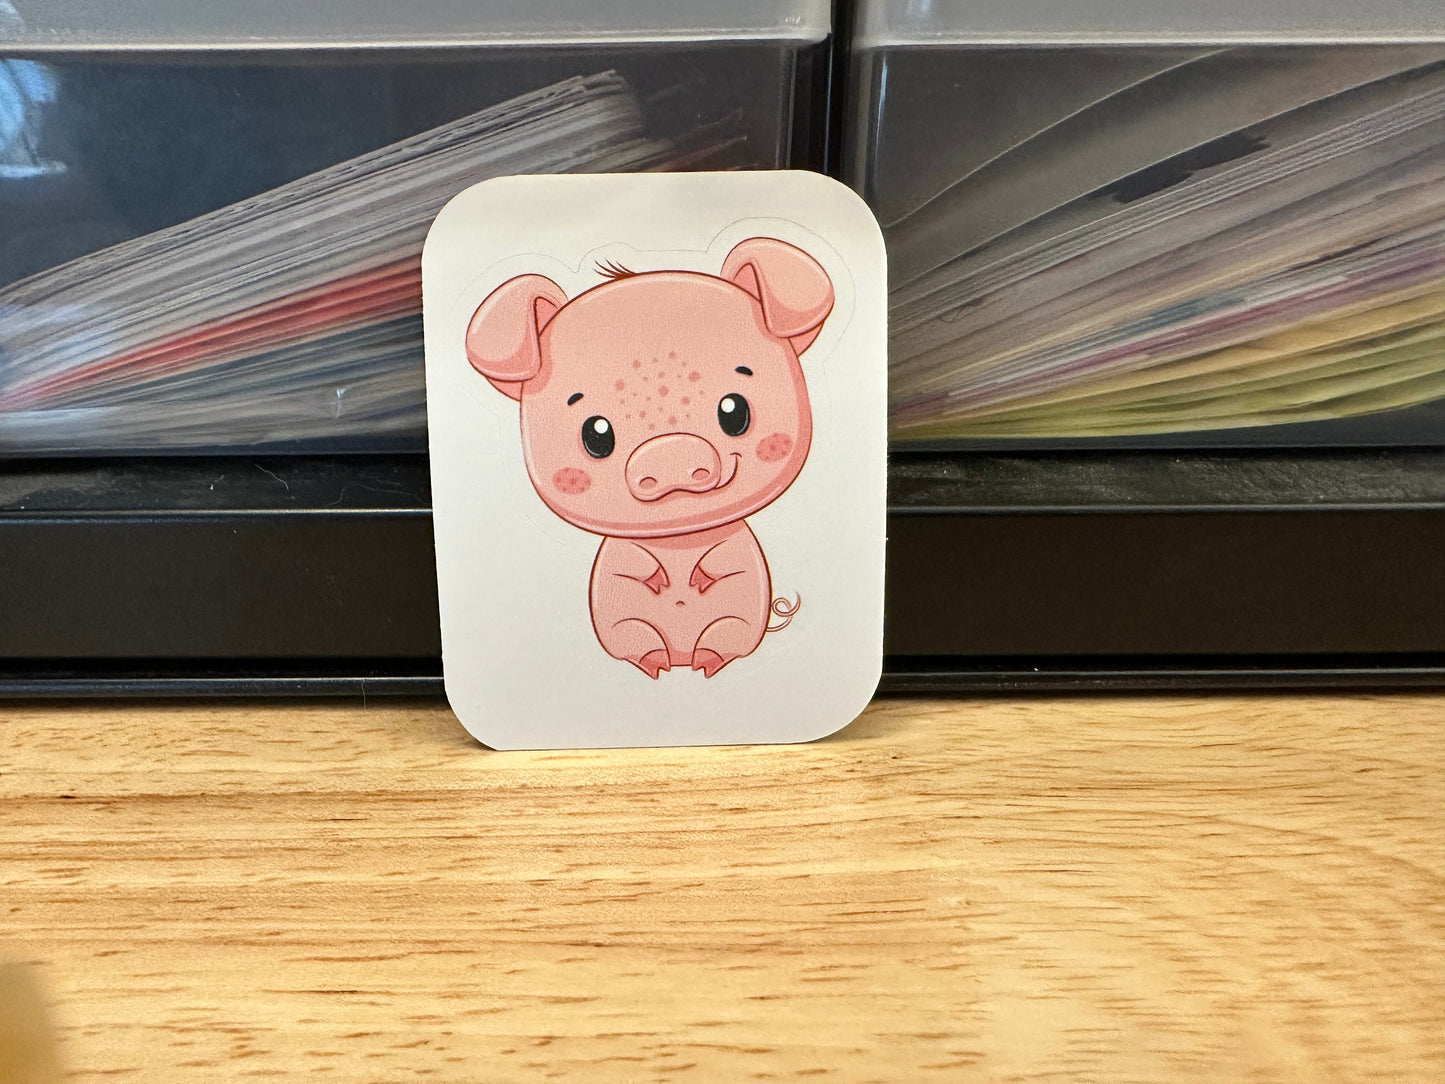 Cute Pig STICKER, Cute Pig with paws sticker, Laptop sticker, Halographic option, cool pig sitting down